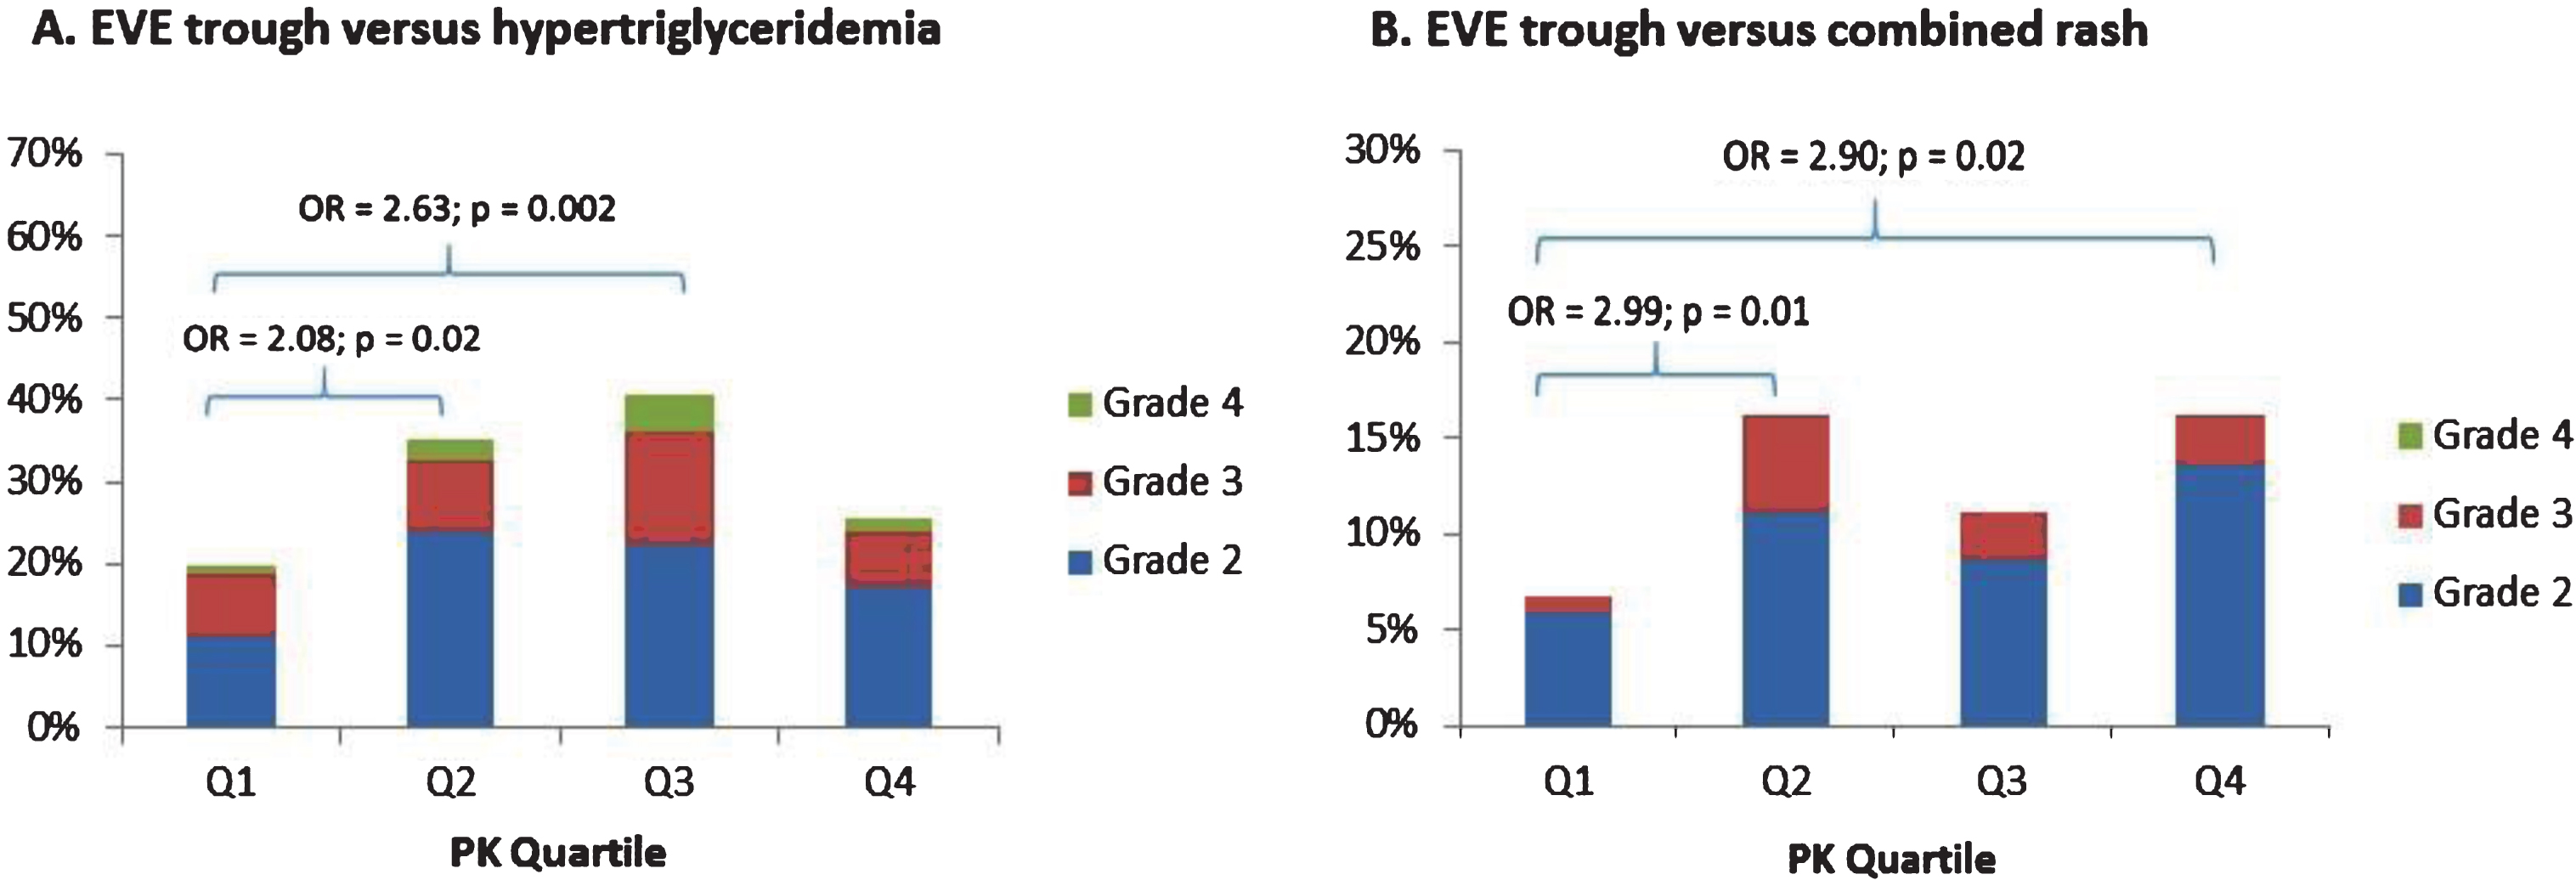 Risk of hypertriglyceridemia (panel A) and combined skin rash (panel B) by EVE trough quartile ranges.